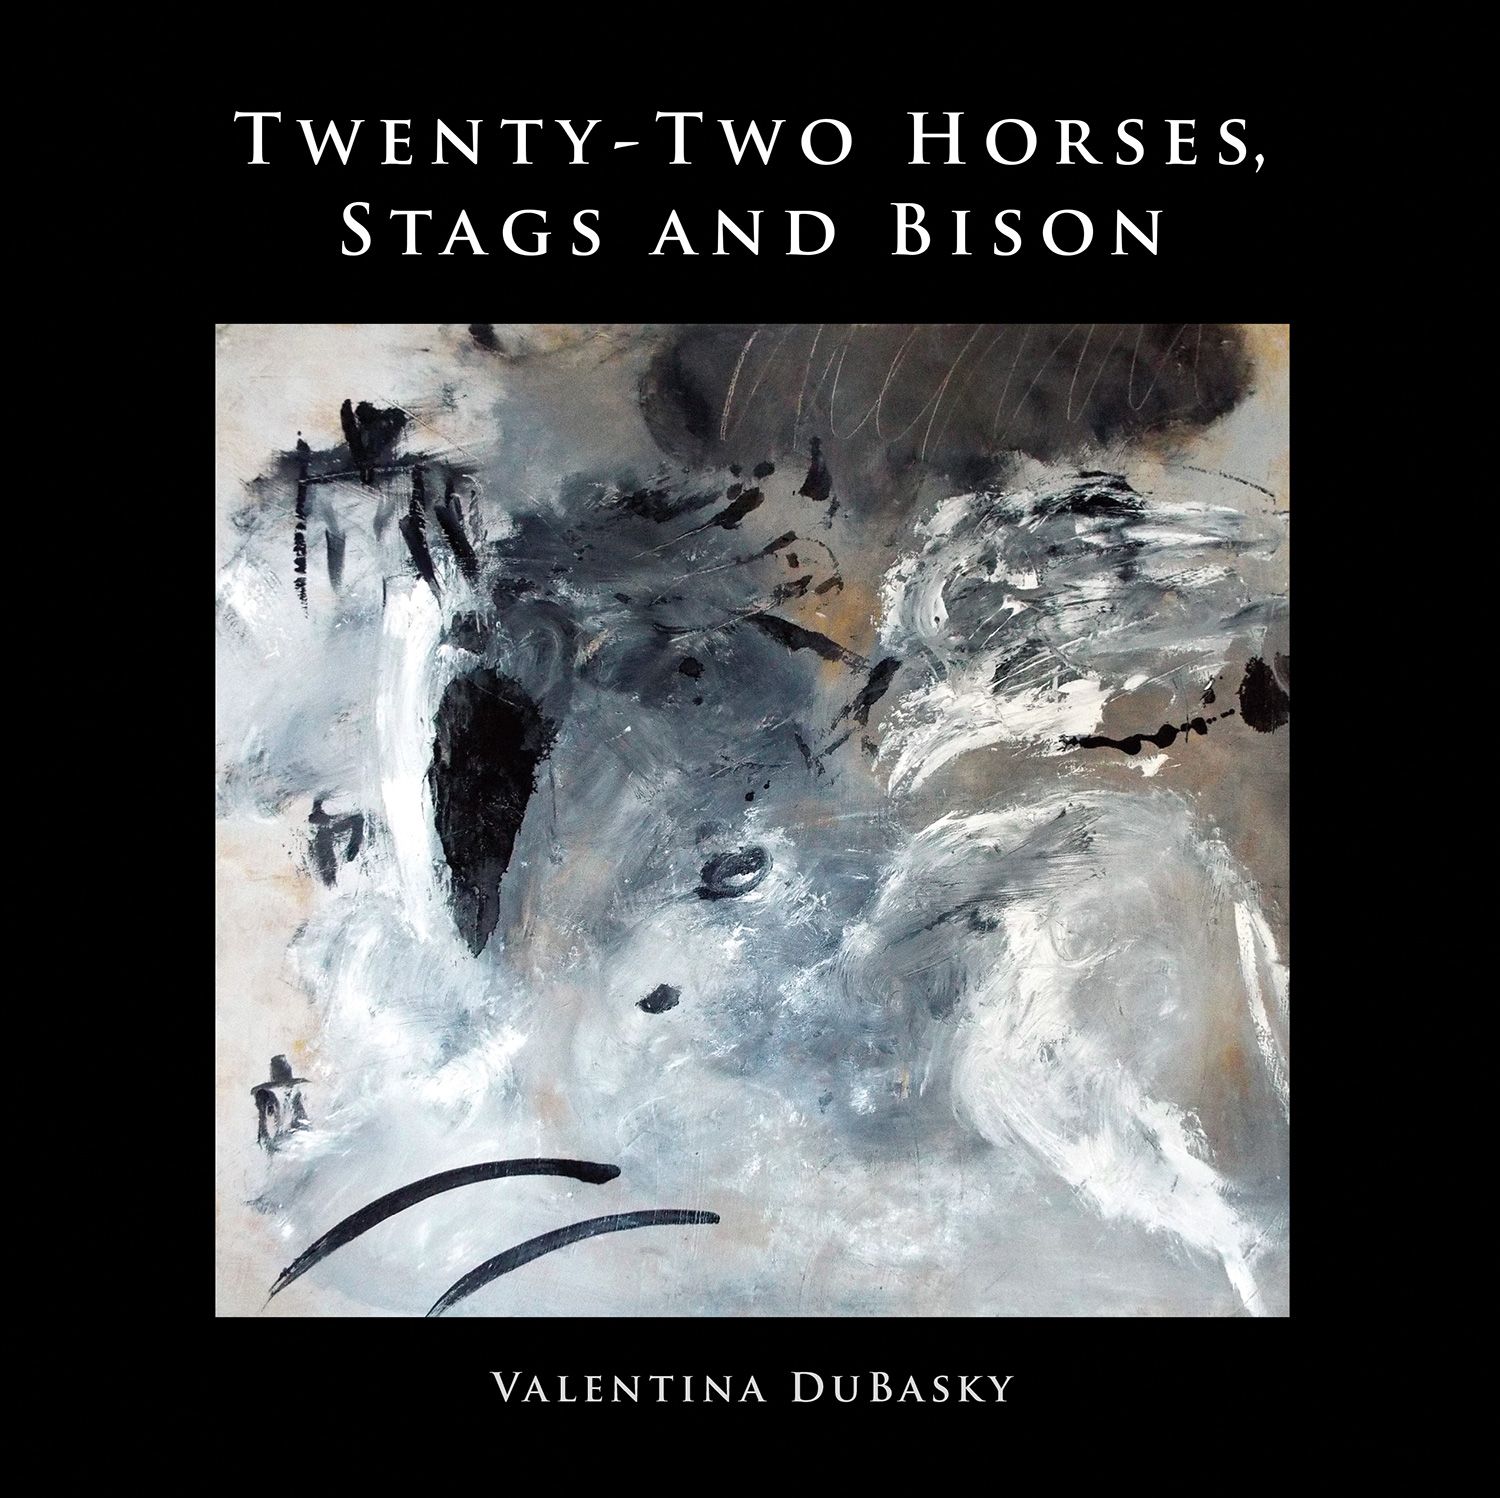 Twenty-Two Horses, Stags and Bison